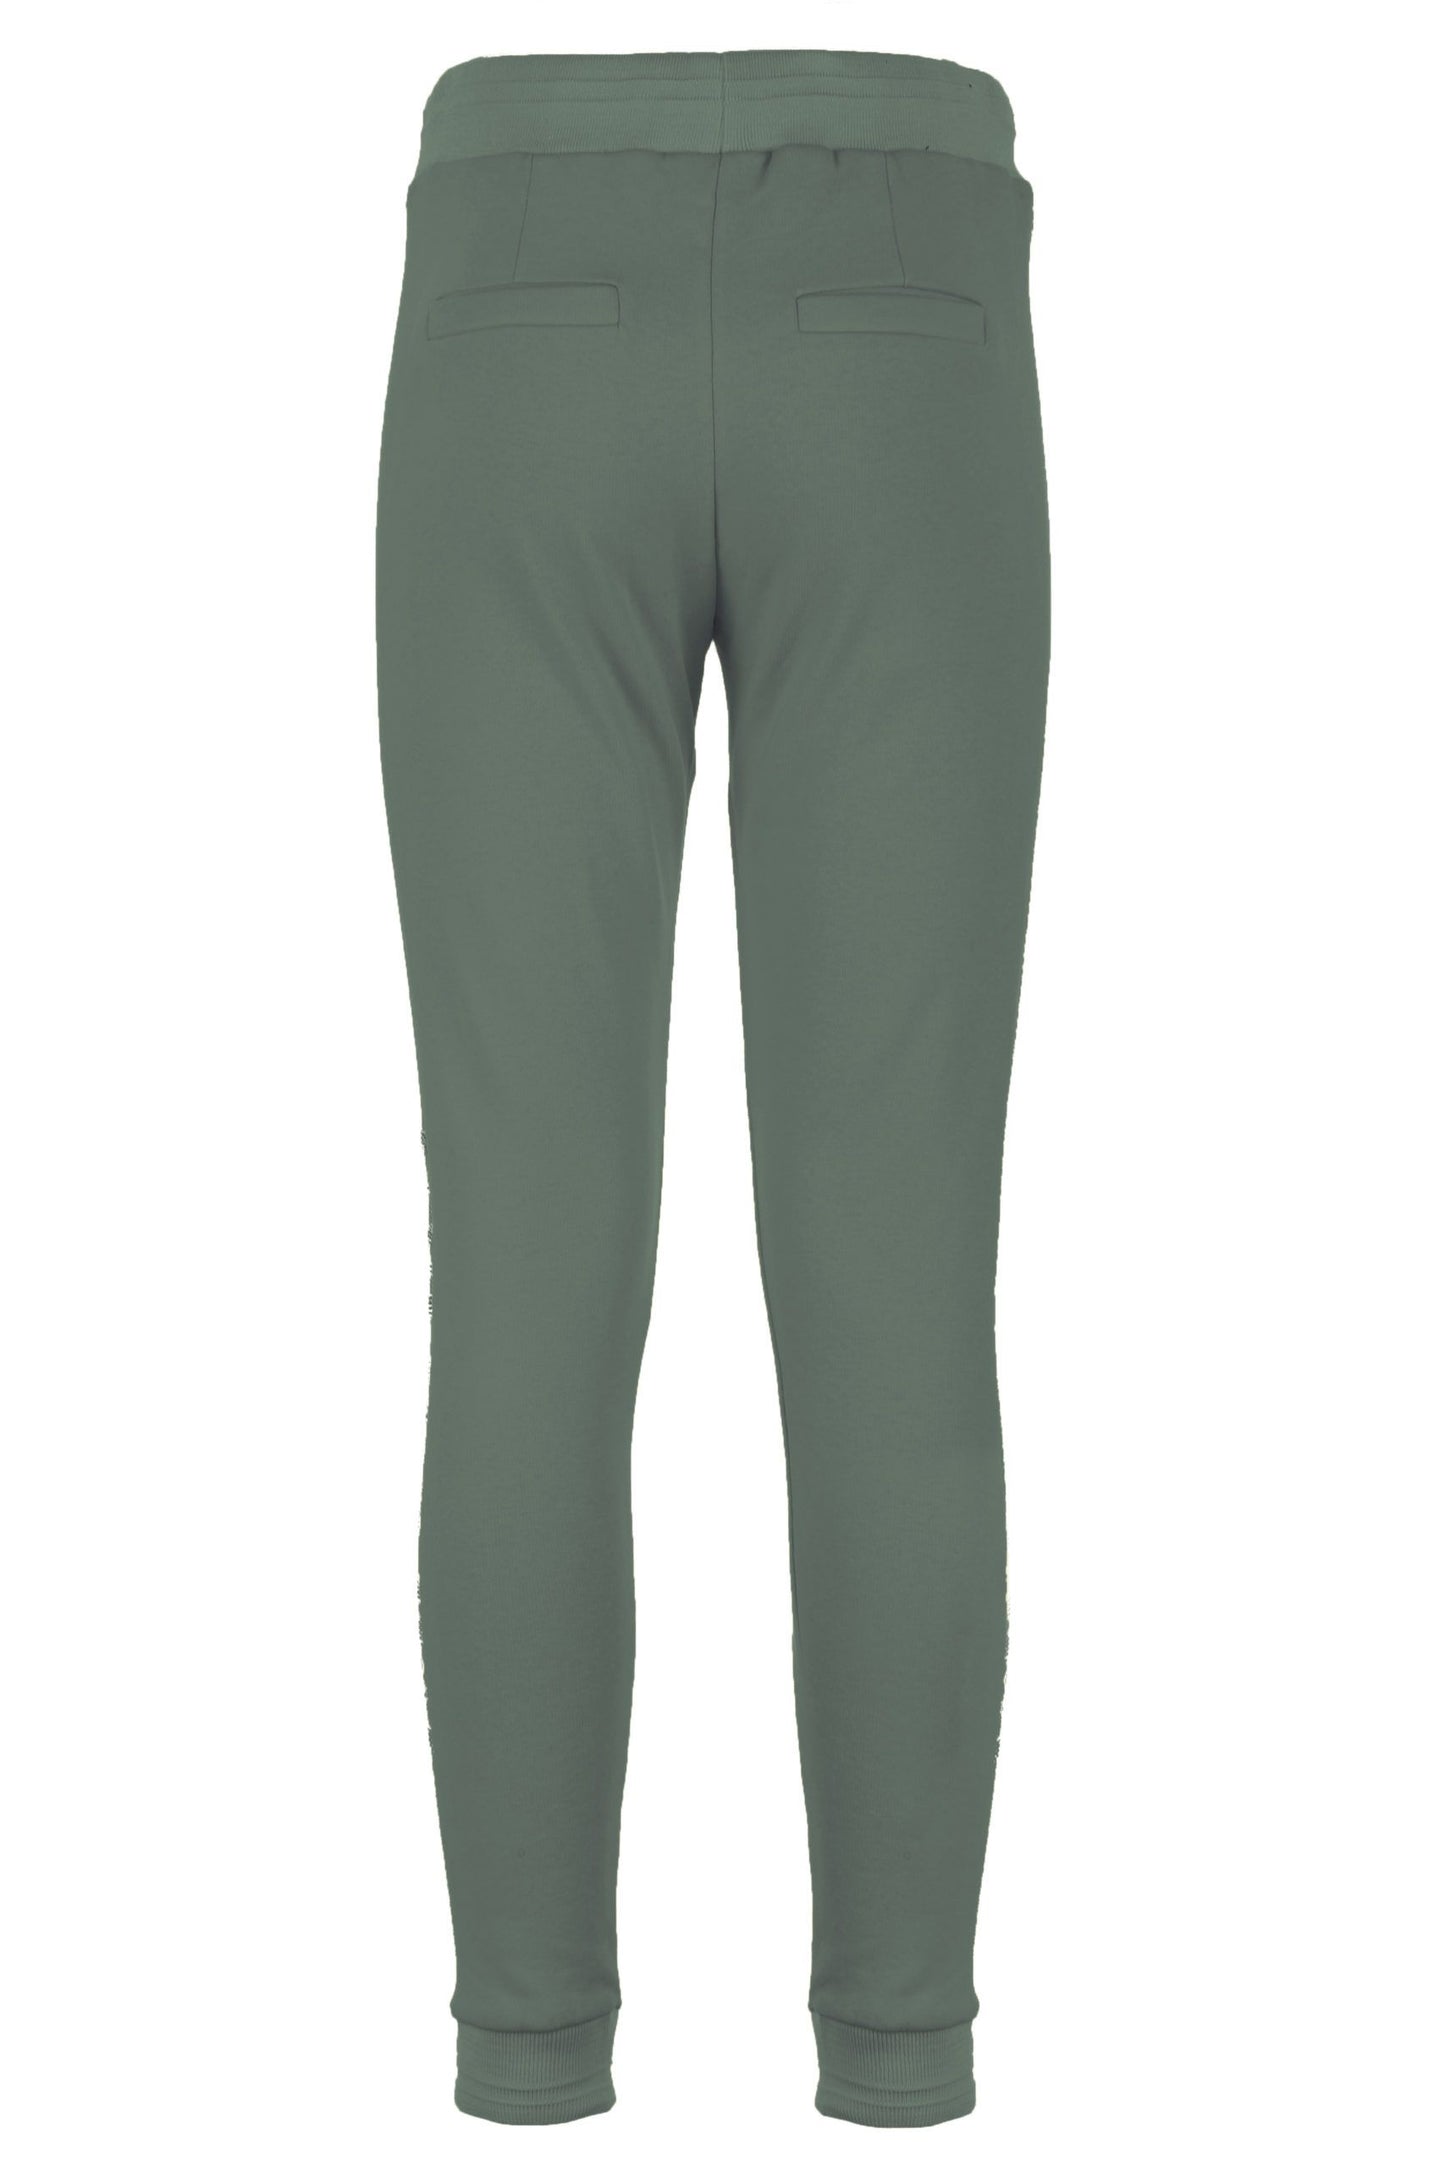 Chic Green Stretch Sweatpants with Brass Accent